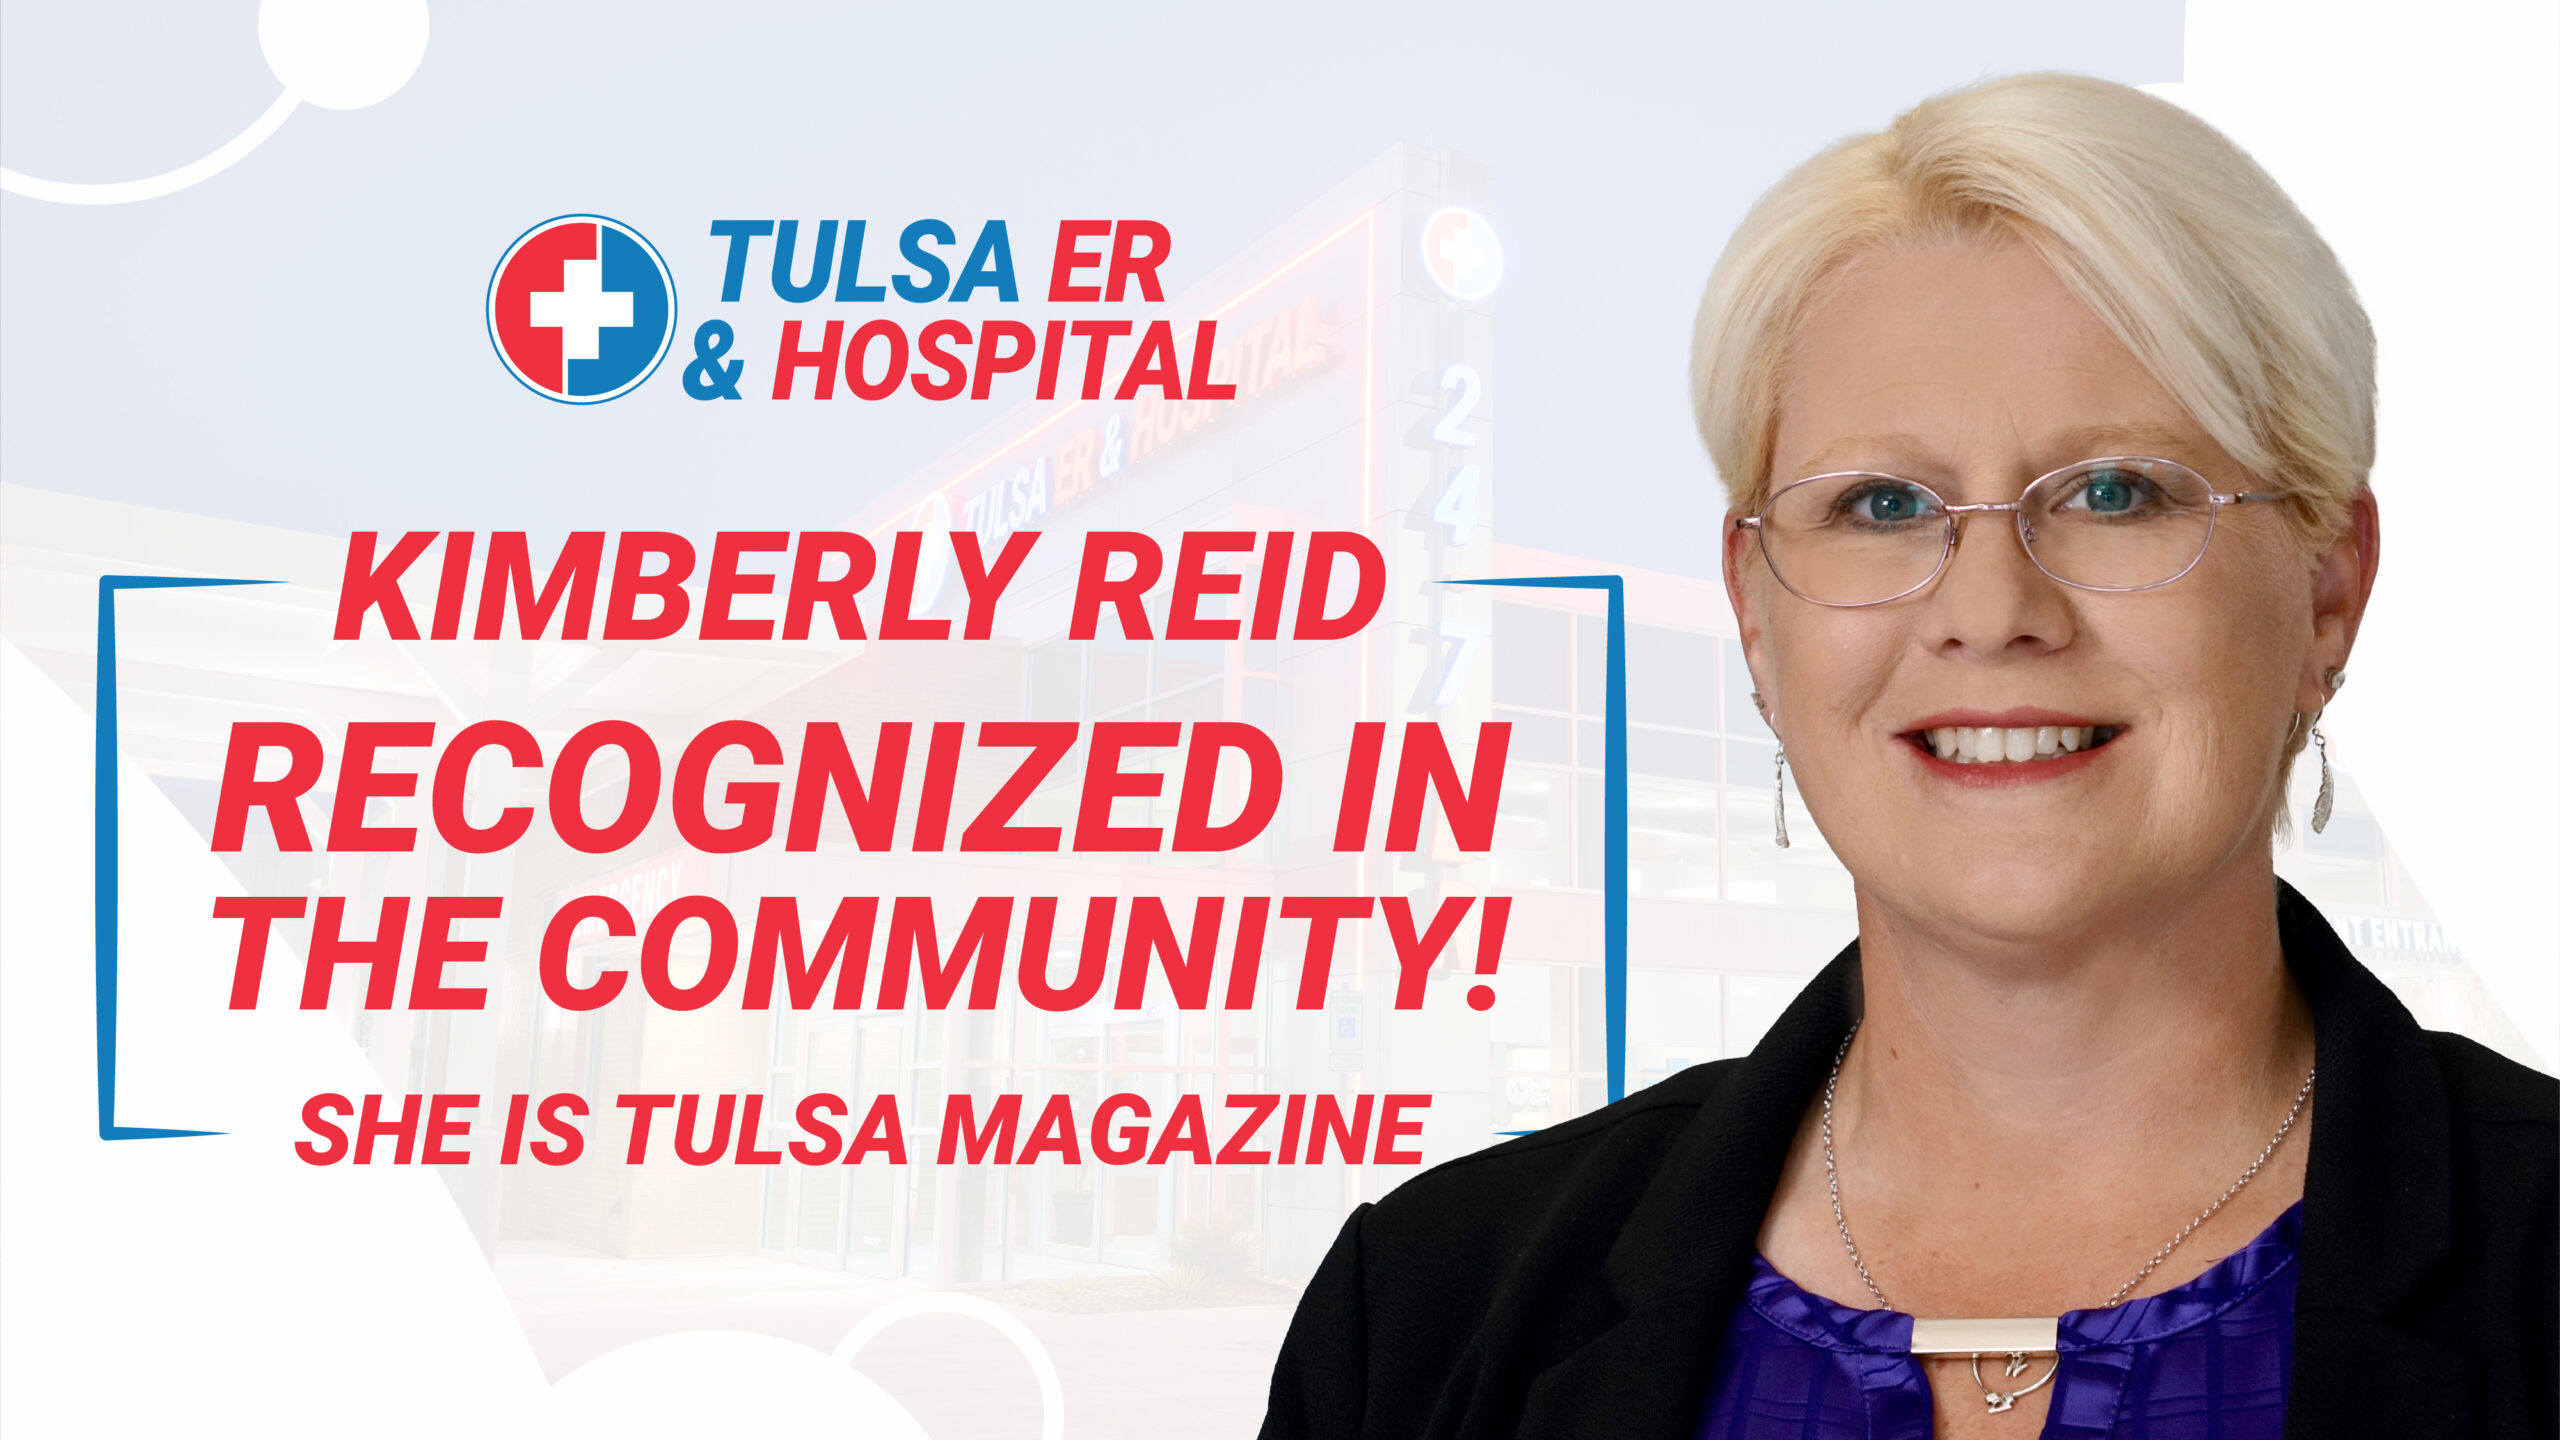 Tulsa ER & Hospital’s Facility Administrator, Kimberly Reid, Recognized as Influential Woman in Tulsa